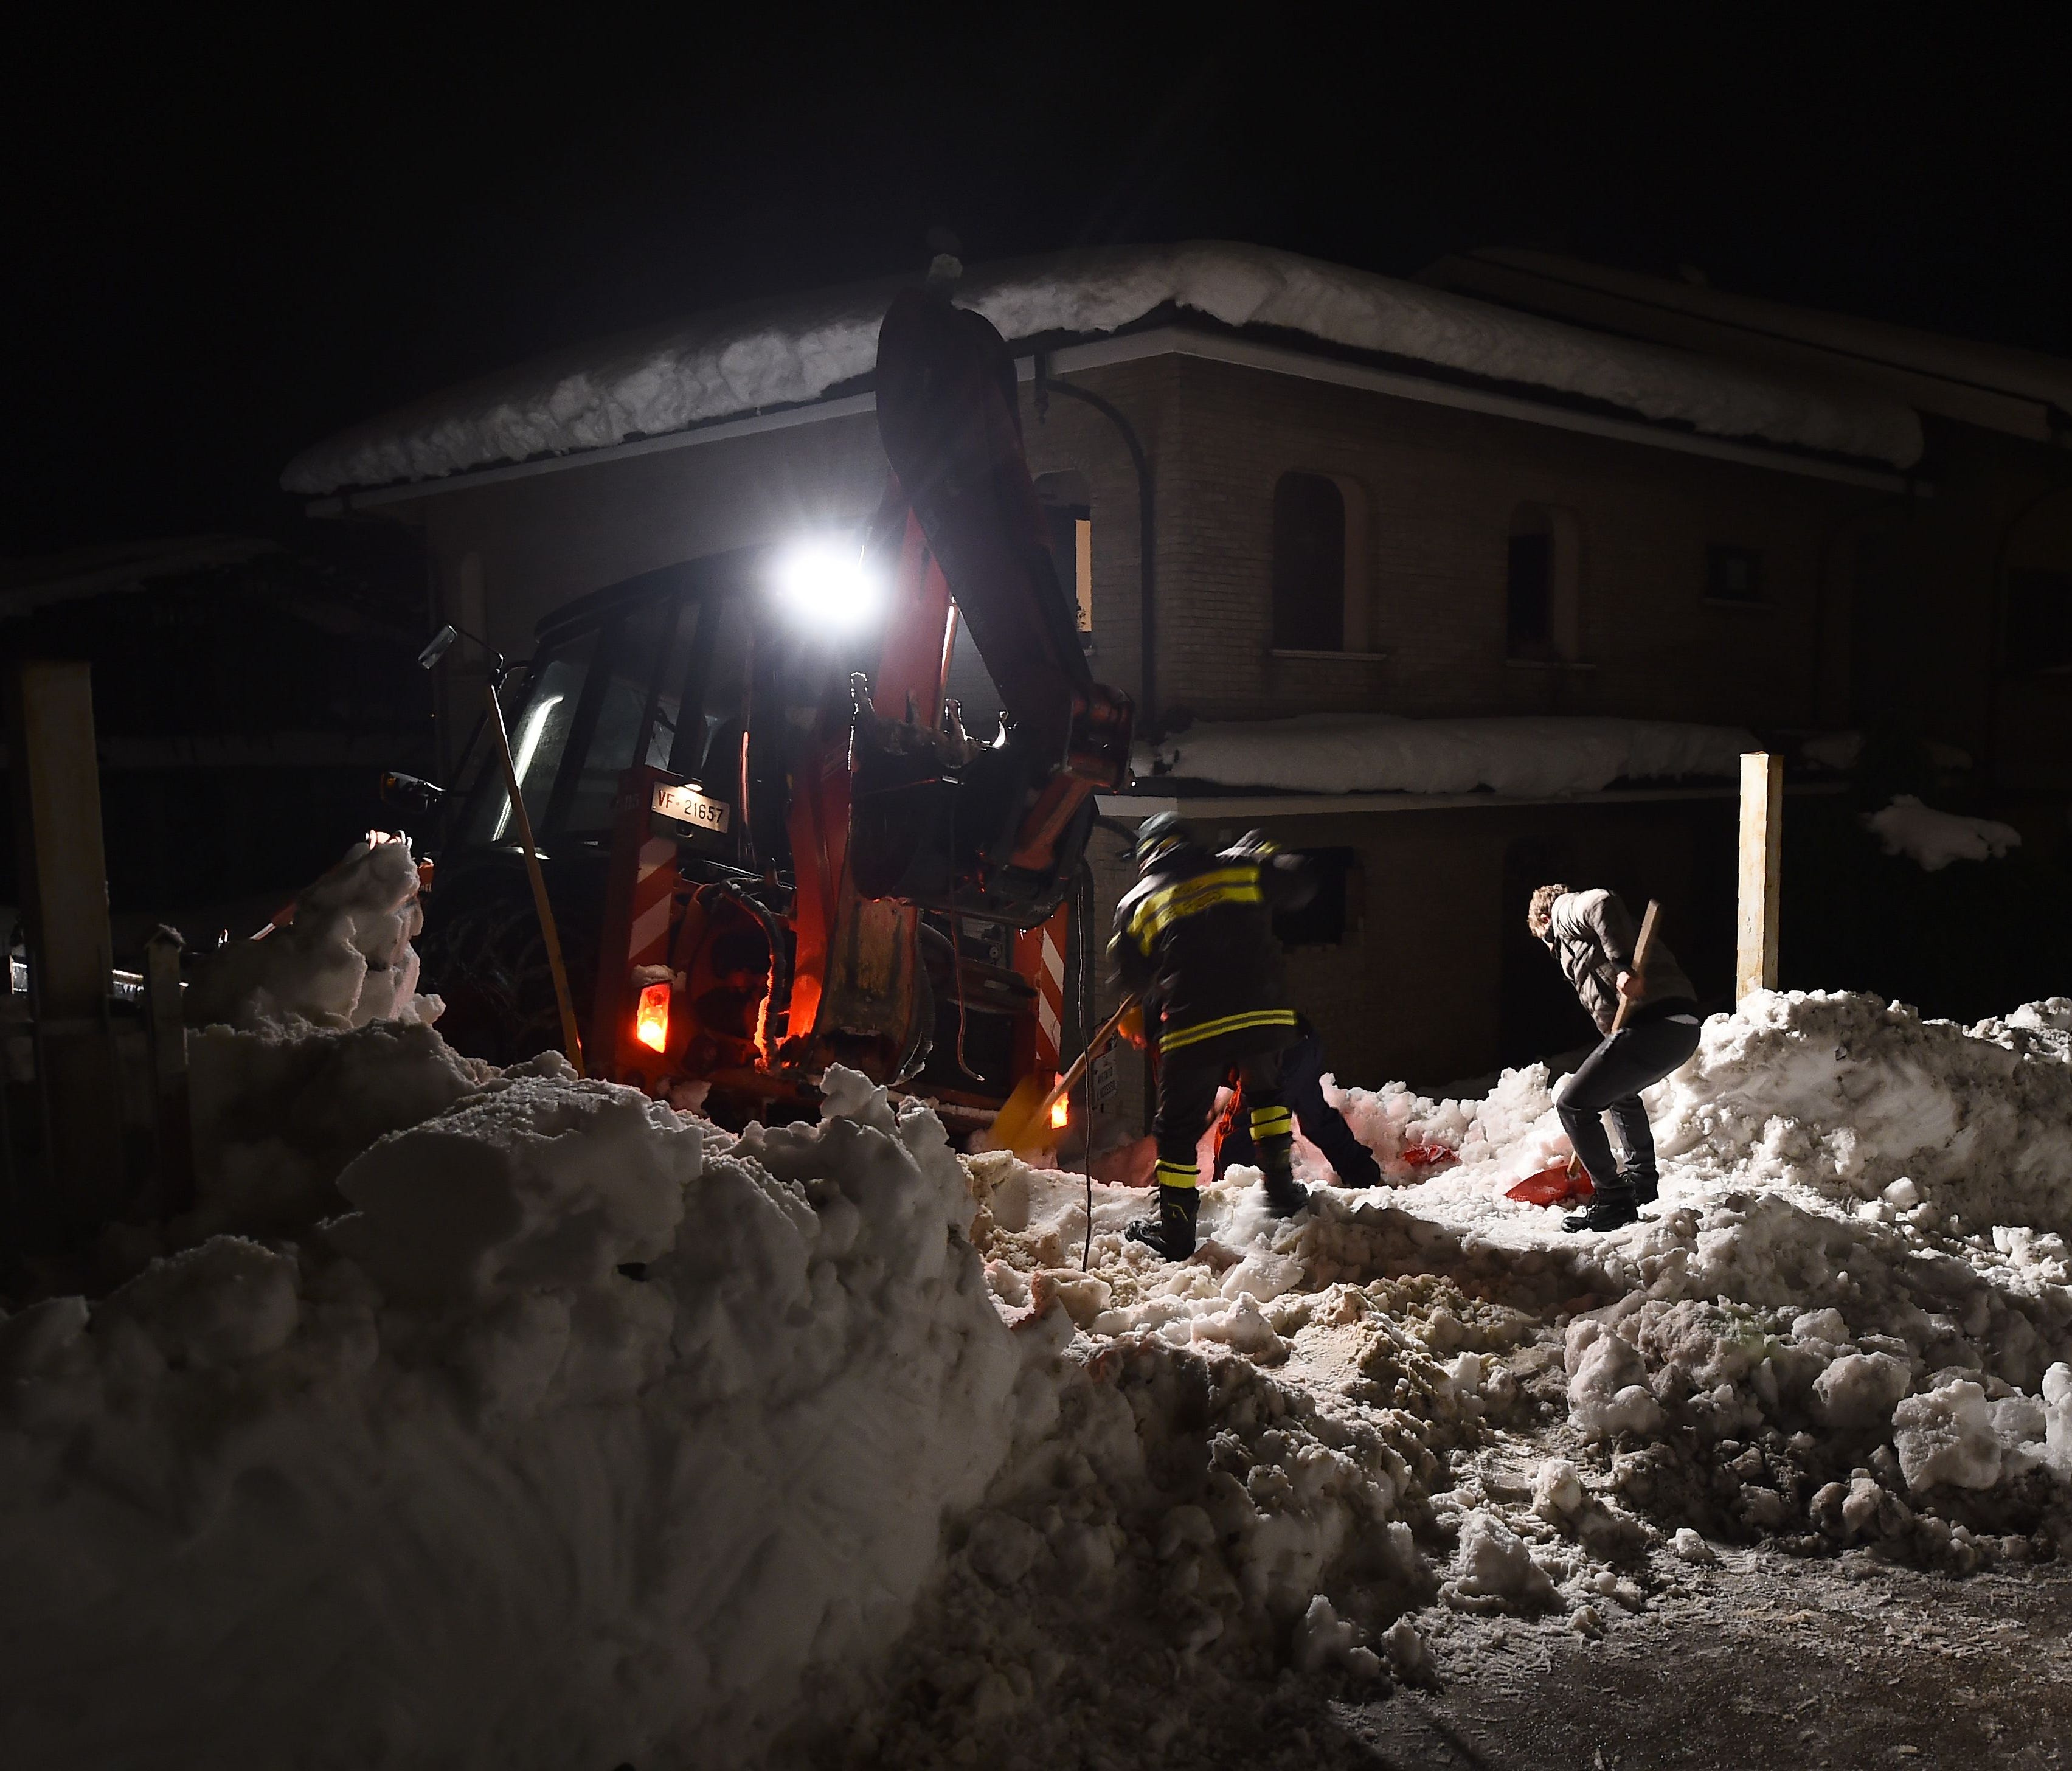 Rescuers remove snow next to a house on a road to the village of Penne, after an avalanche engulfed the mountain hotel Rigopiano in Farindola in earthquake-ravaged central Italy, on Jan. 19, 2017.